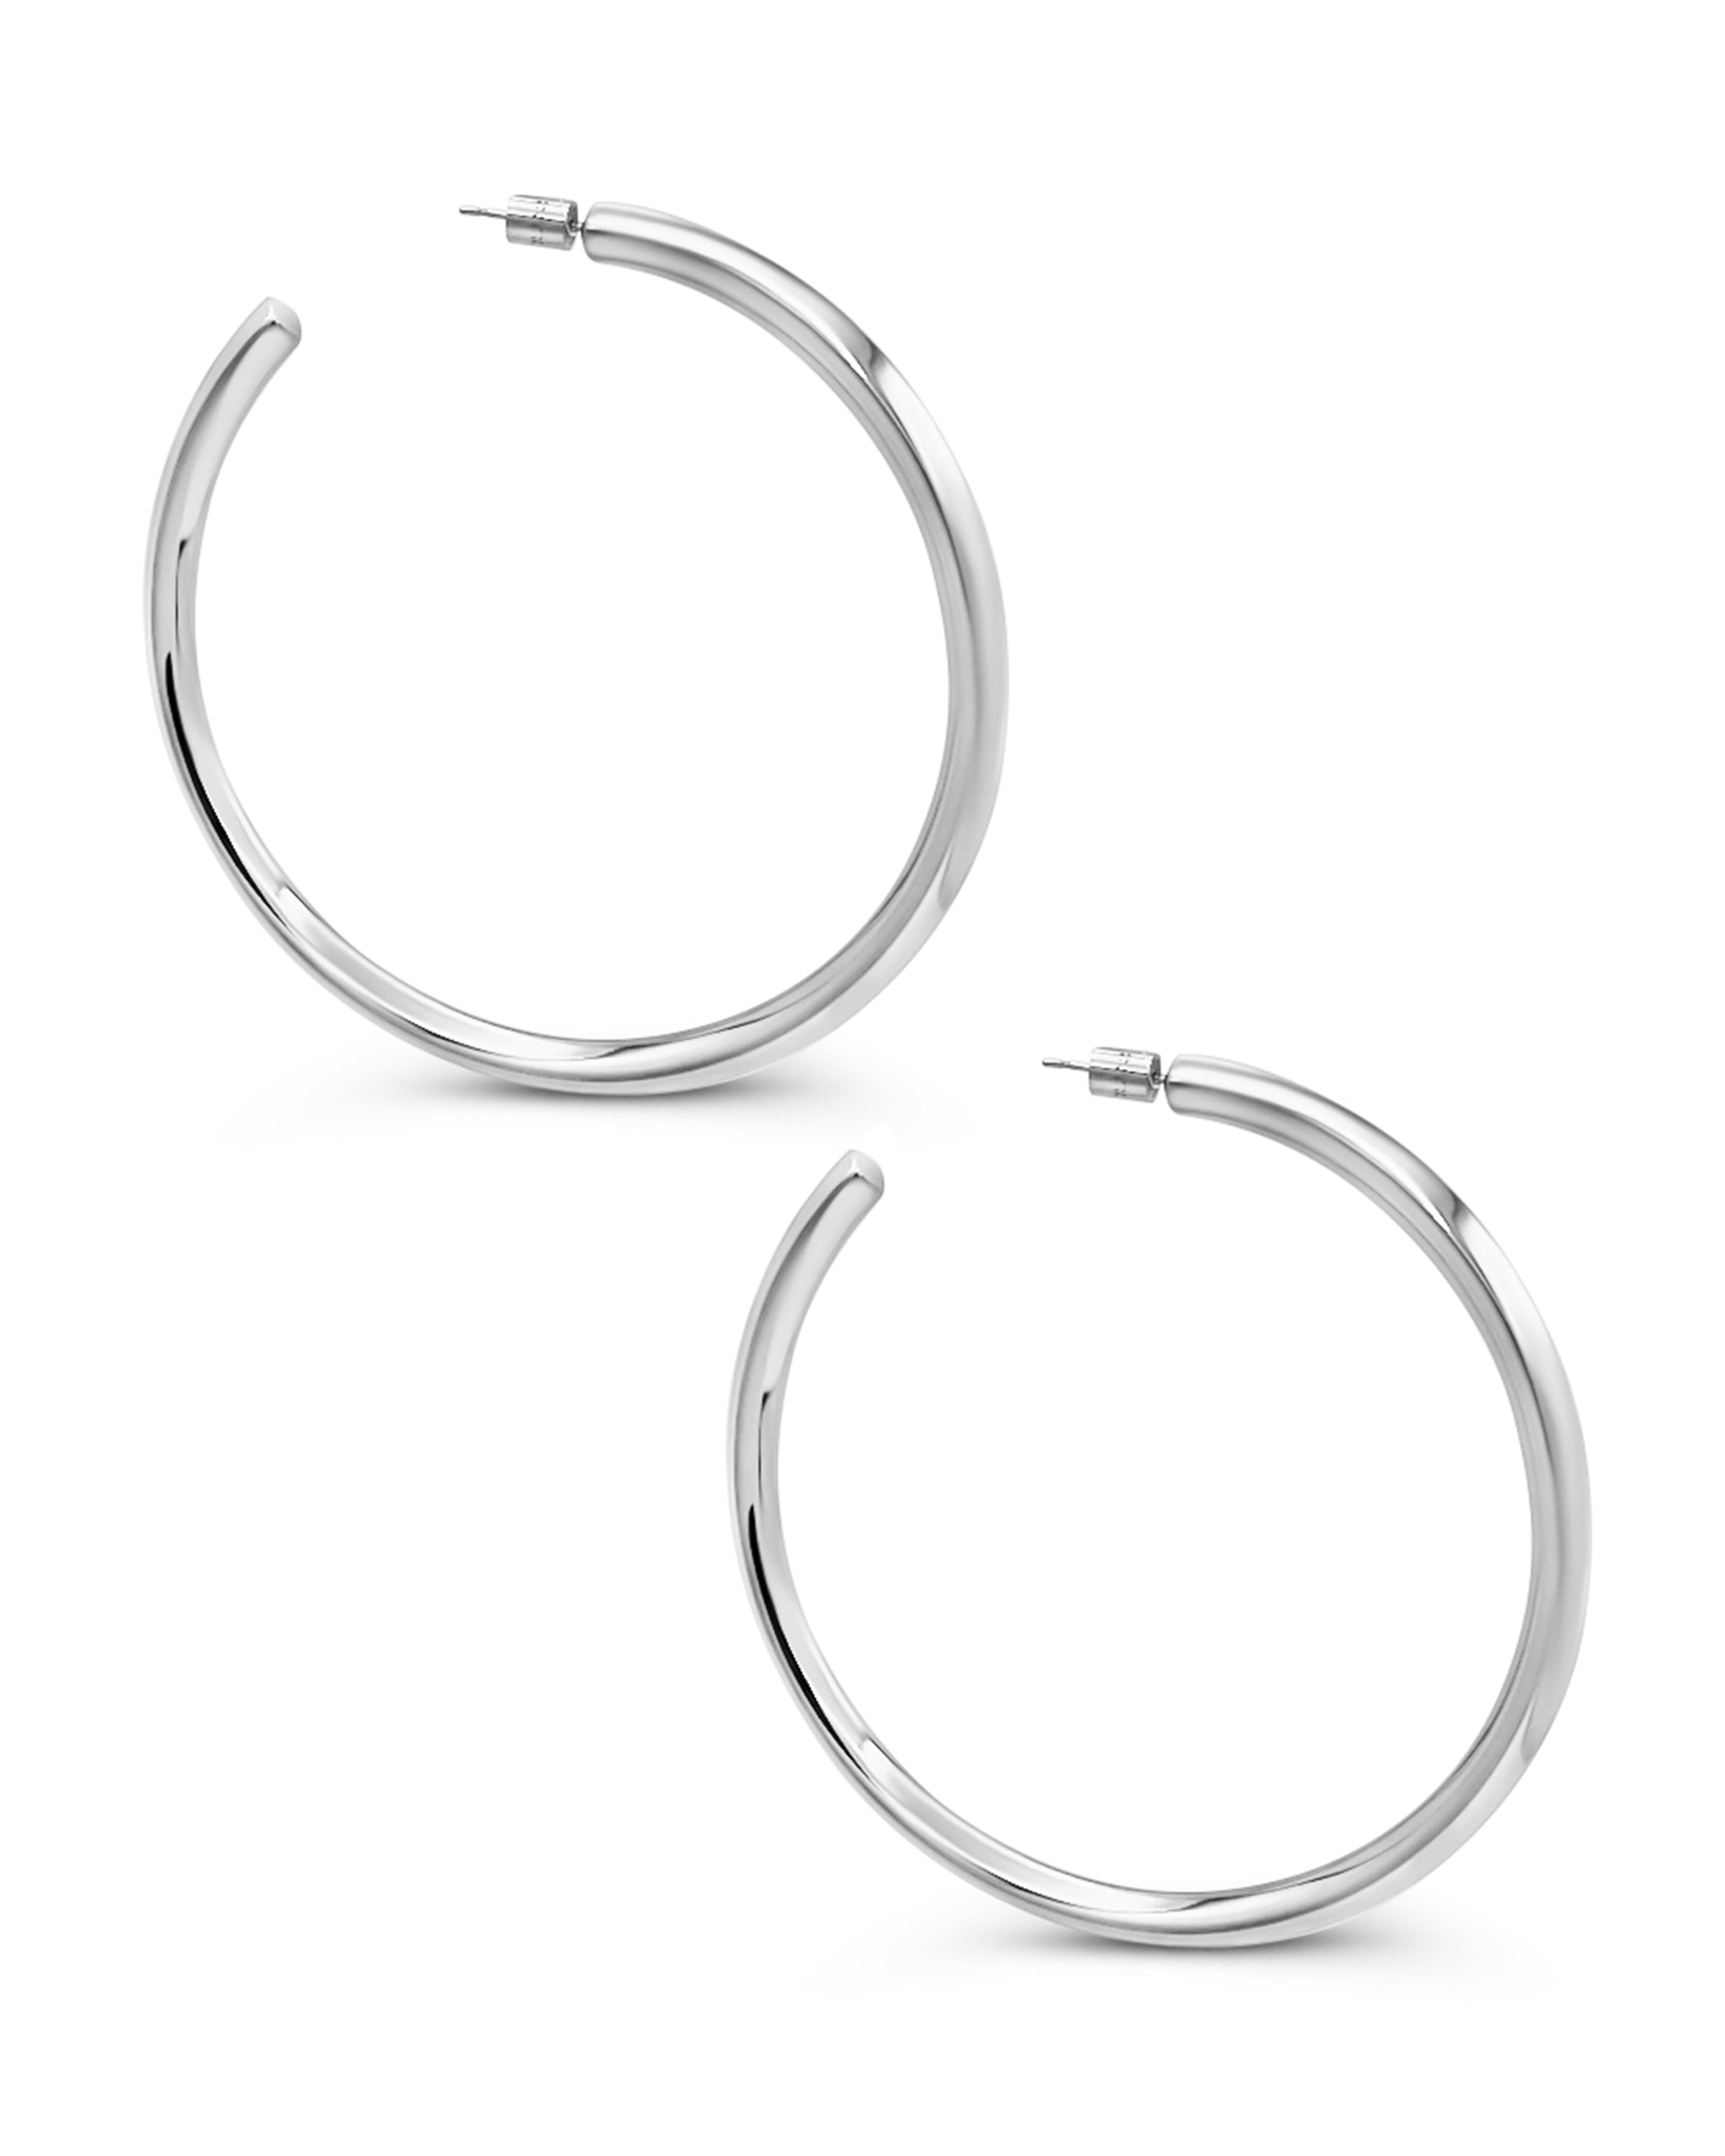 SIGNATURE HOOPS - SILVER